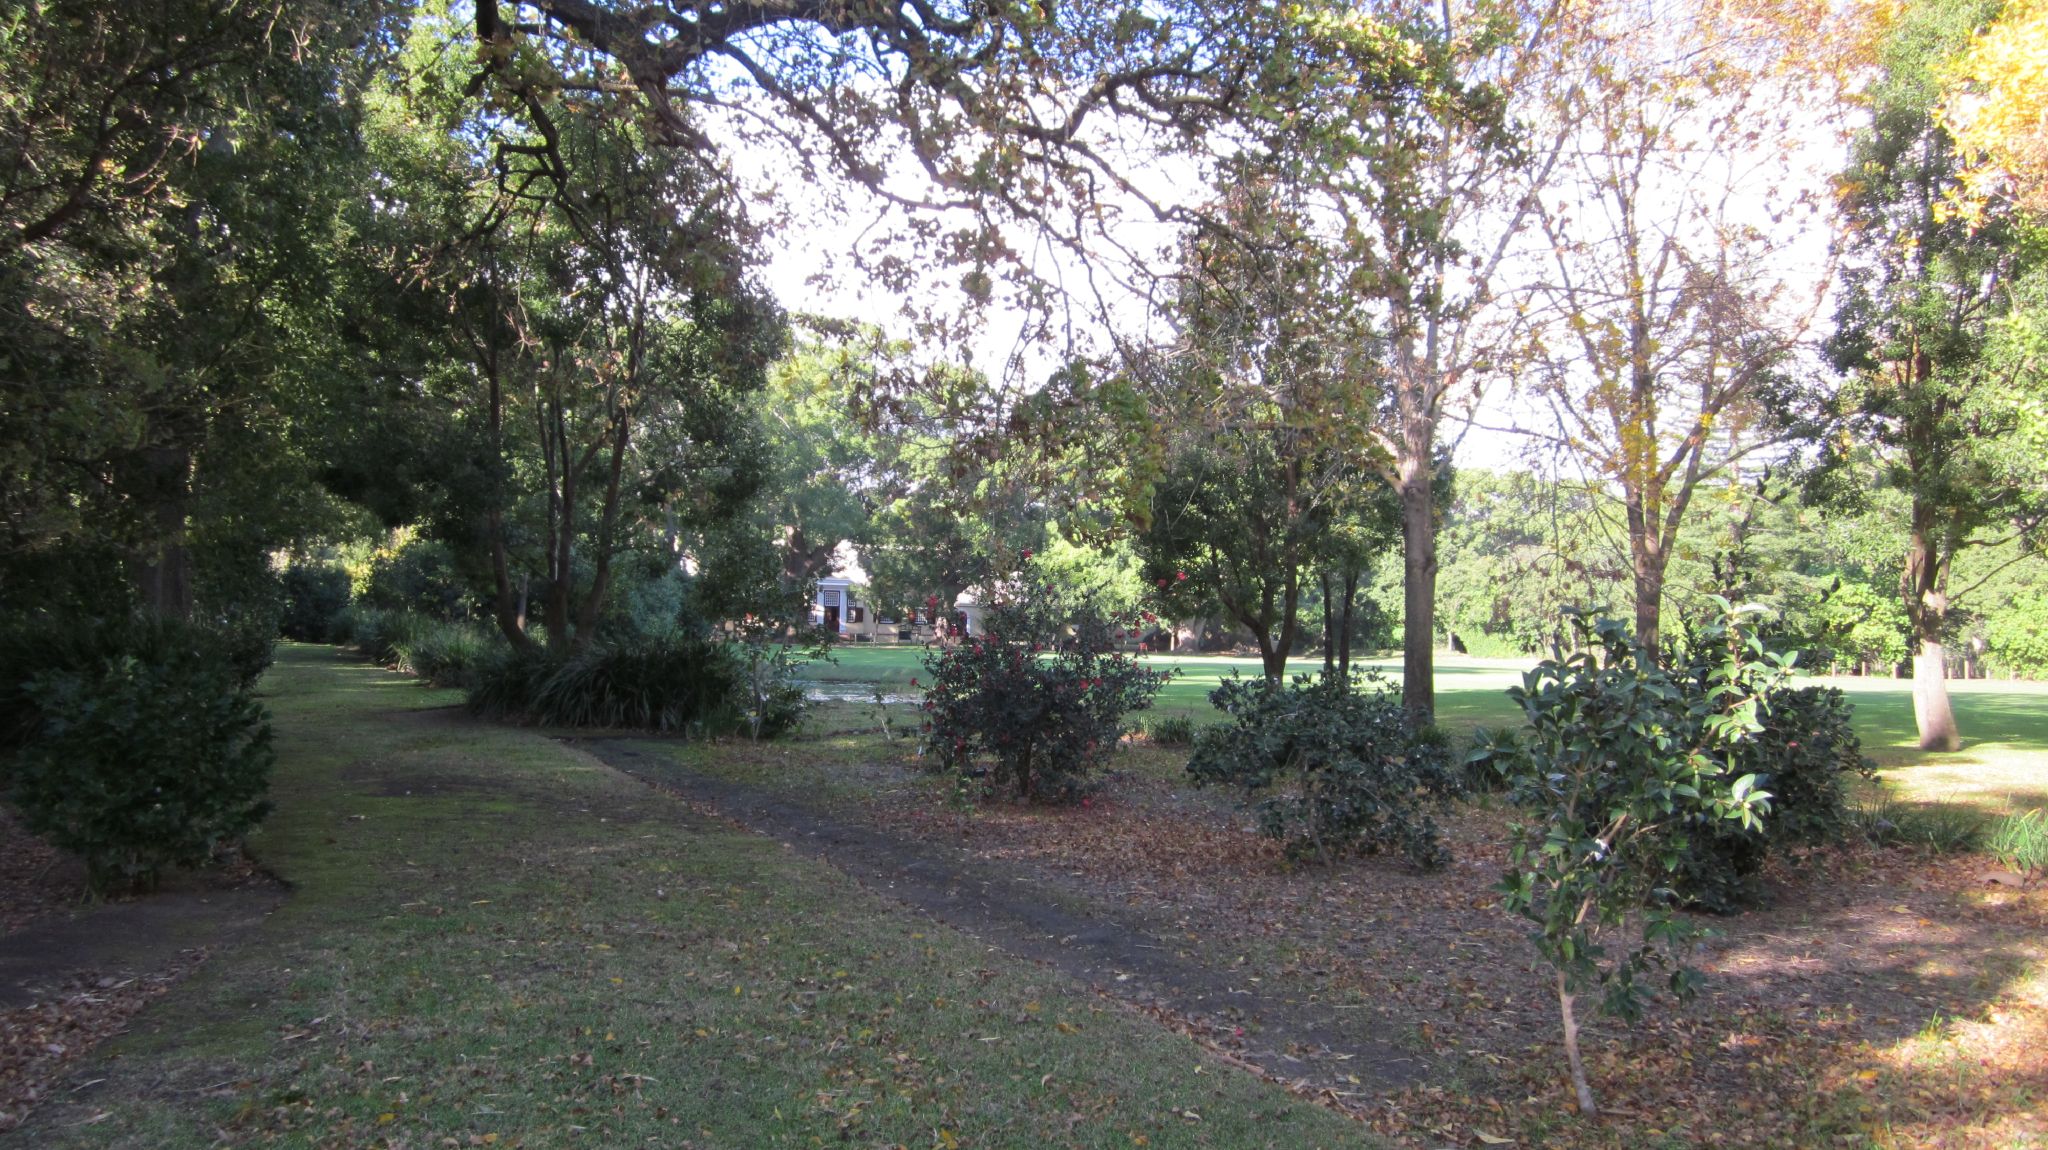 a grassy area with trees and bushes in the foreground